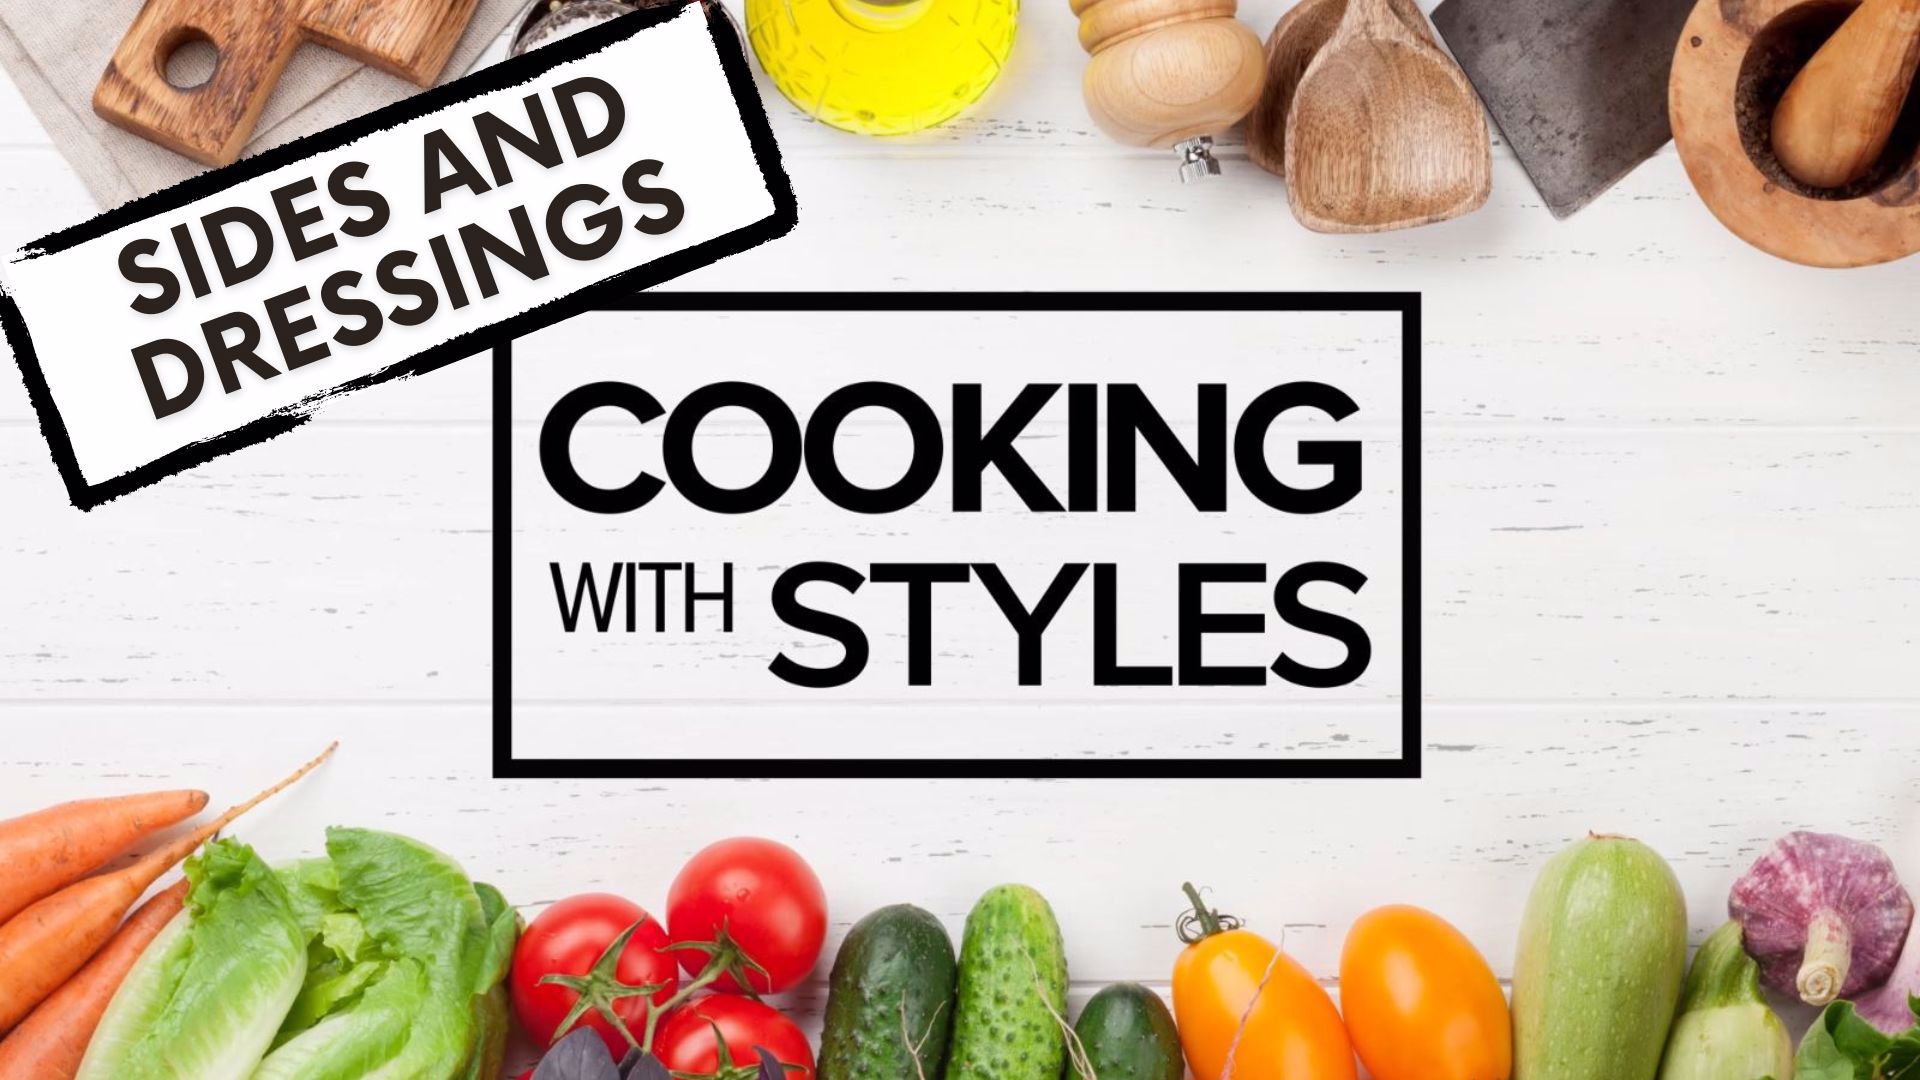 Shawn Styles shares his recipes on how to make show stopping side dishes like smashed red potatoes, as well as dressings for your favorite salads.